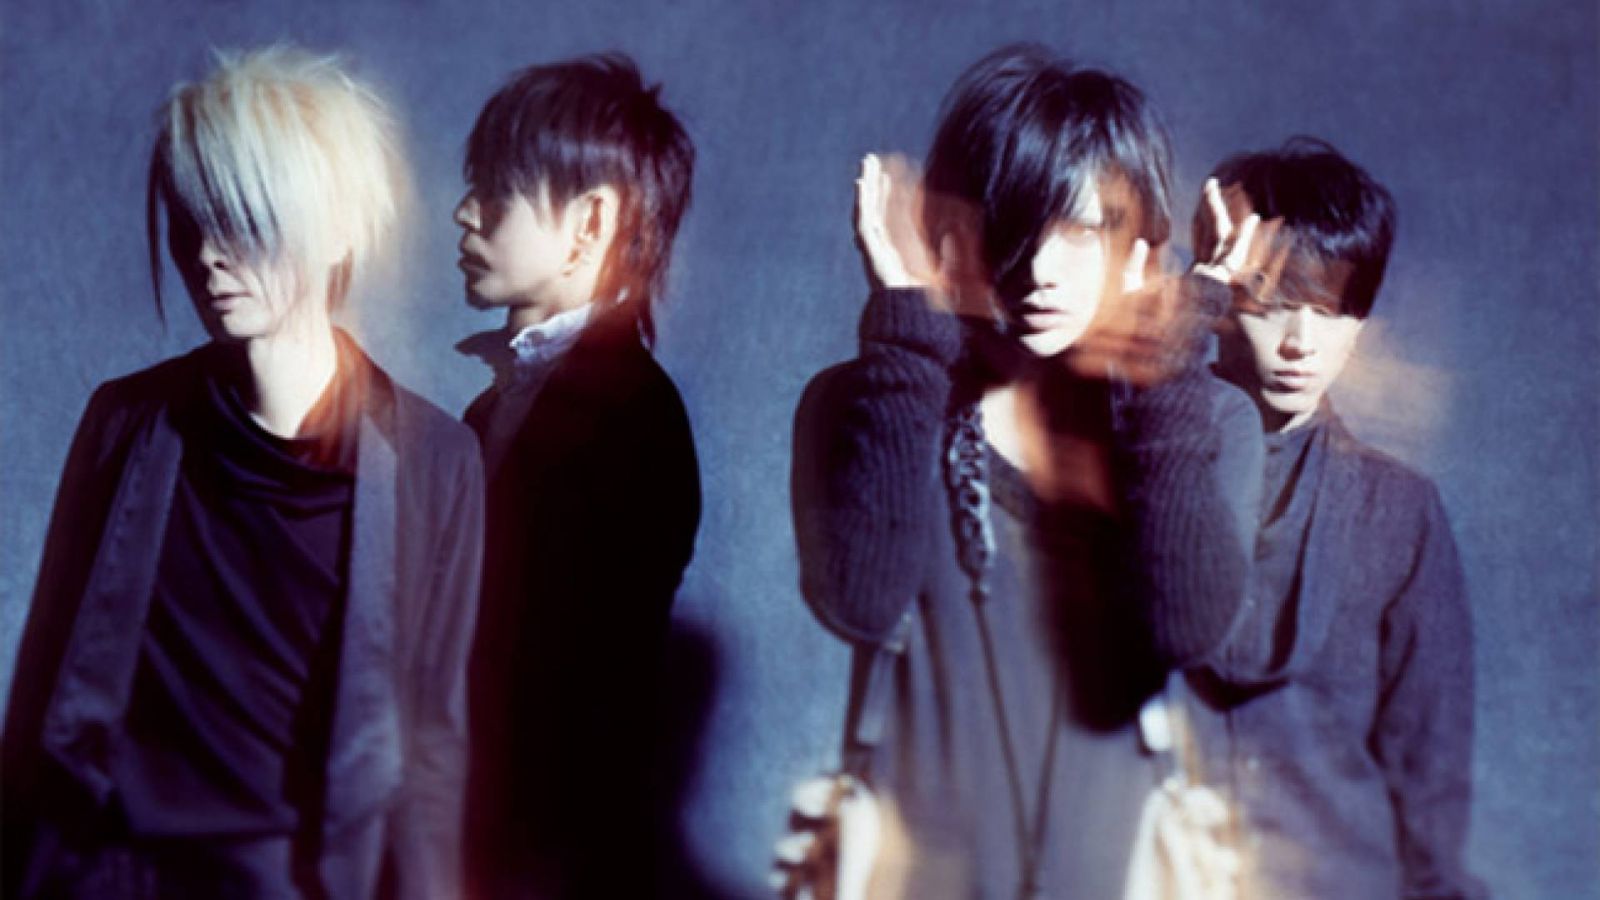 Details about Plastic Tree's New Mini Album © Plastic Tree, all rights reserved